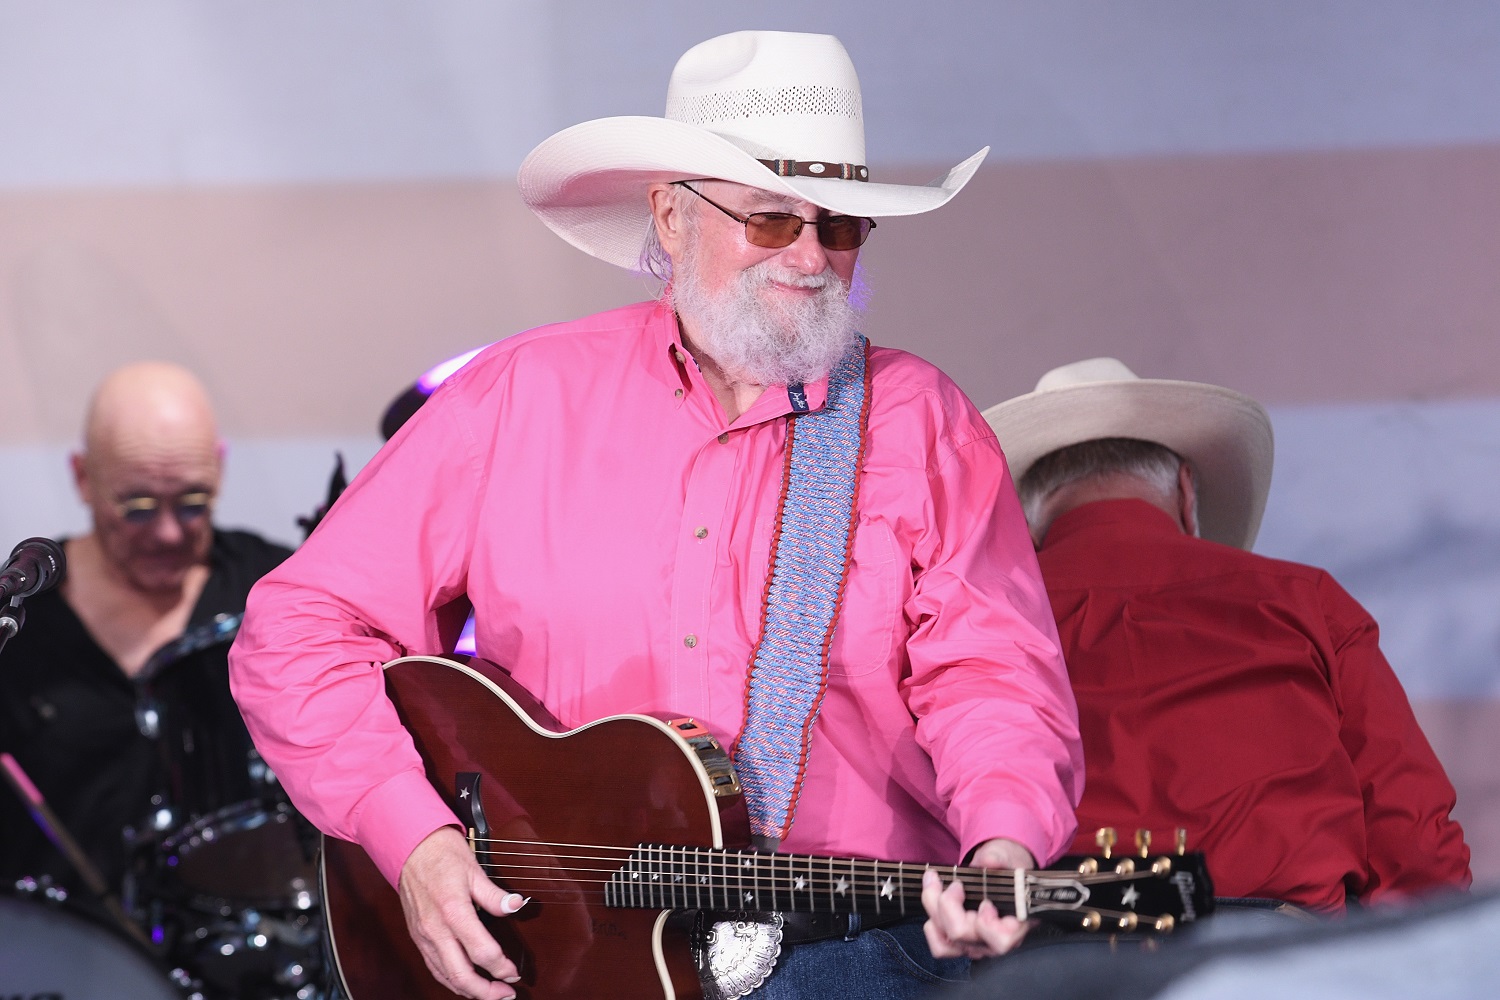 Charlie Daniels Once Wrote a Passionate Letter on PEDs in Sports